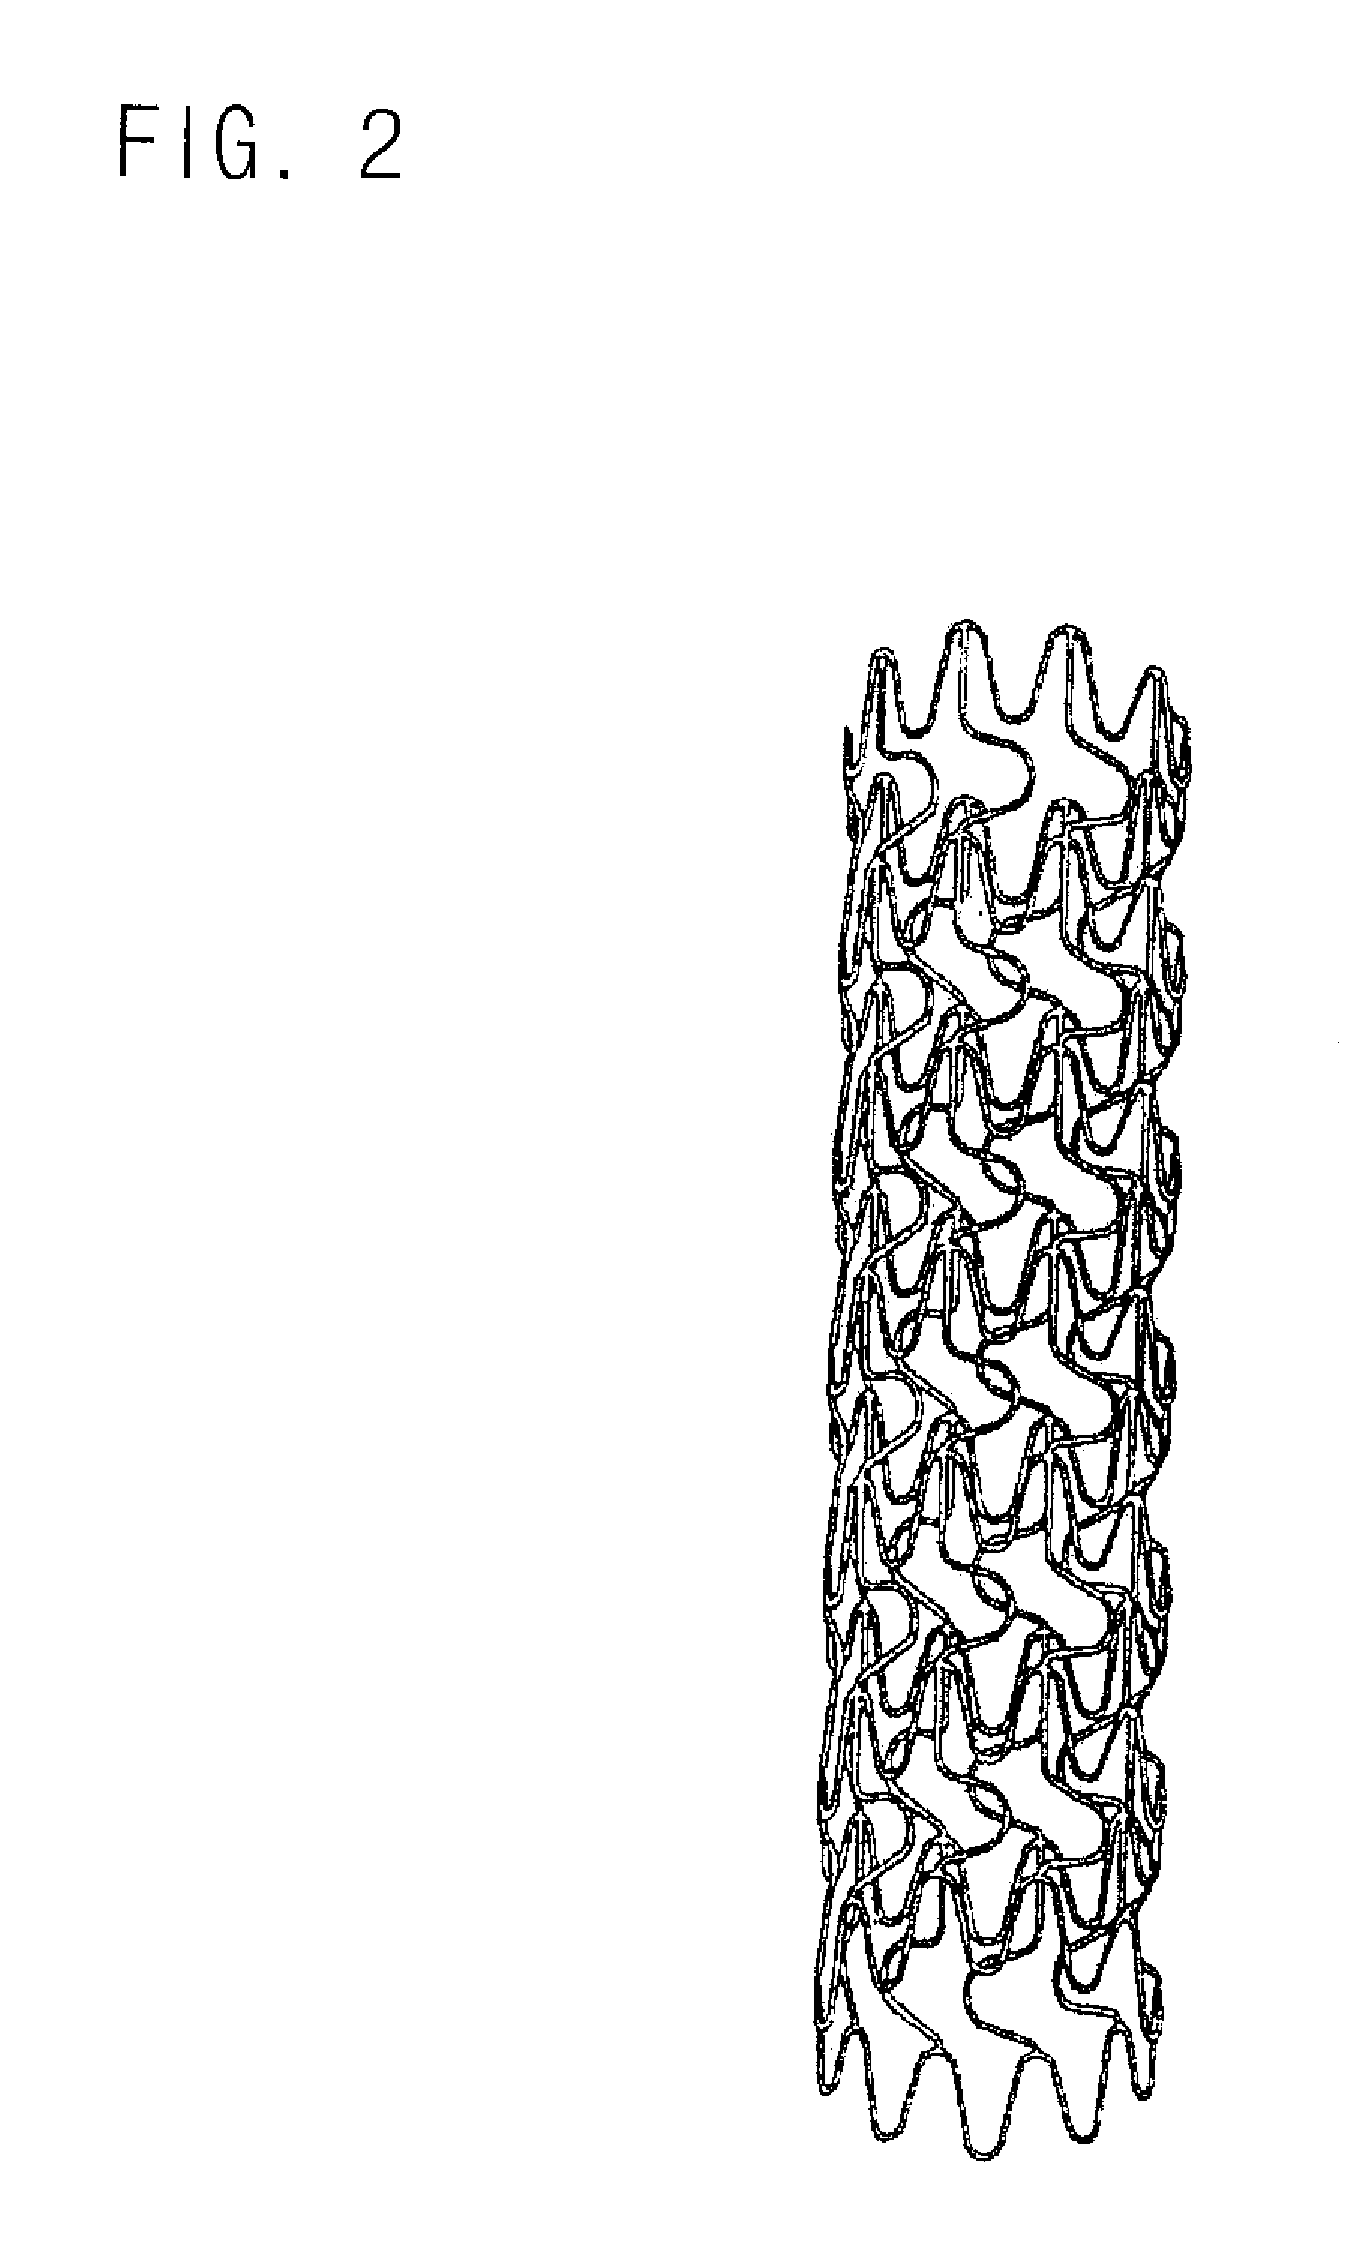 Method of coating stent with glycoprotein receptor inhibitor